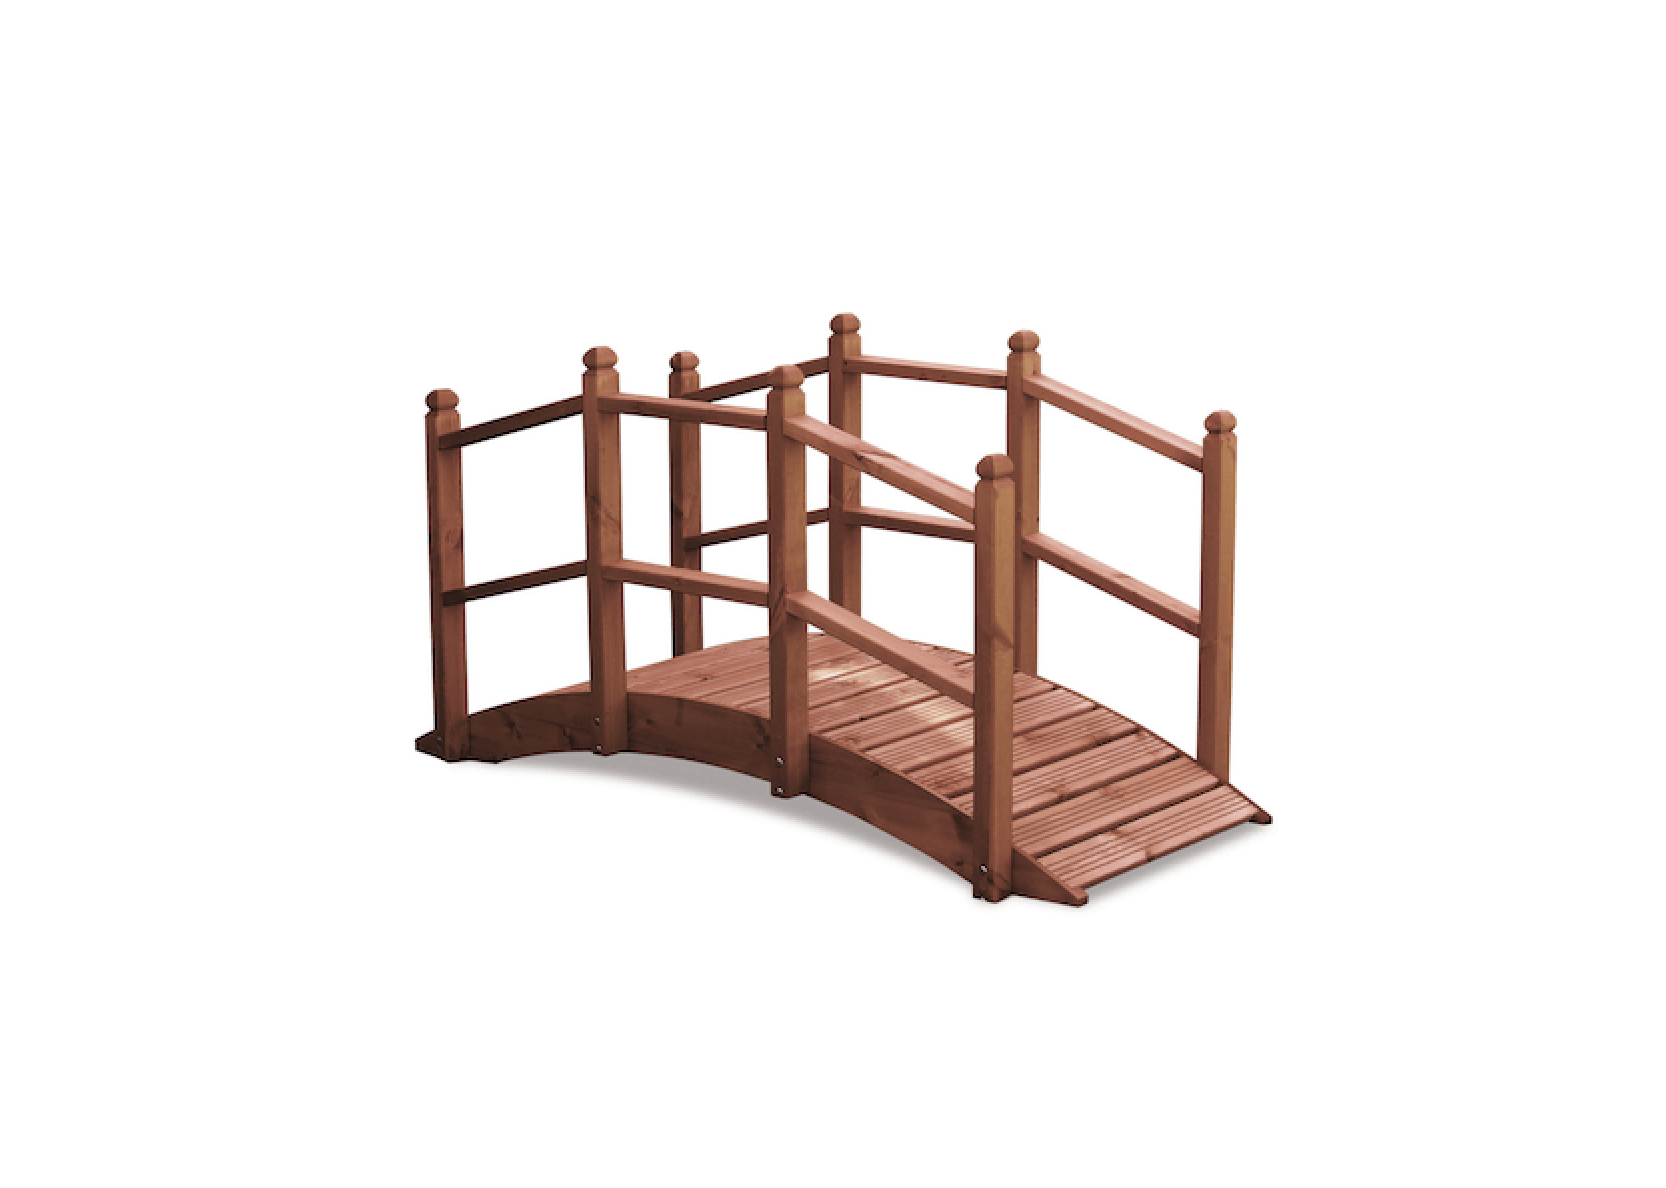 Arch Walkway Wooden Bridge with Safety Rails Stained Finished VINGLI 7.5 ft Garden Bridge Decorative Landscaping Footbridge for Koi Pond Dry Creek Bed Garden Pathway or Rustic Wedding Decor 